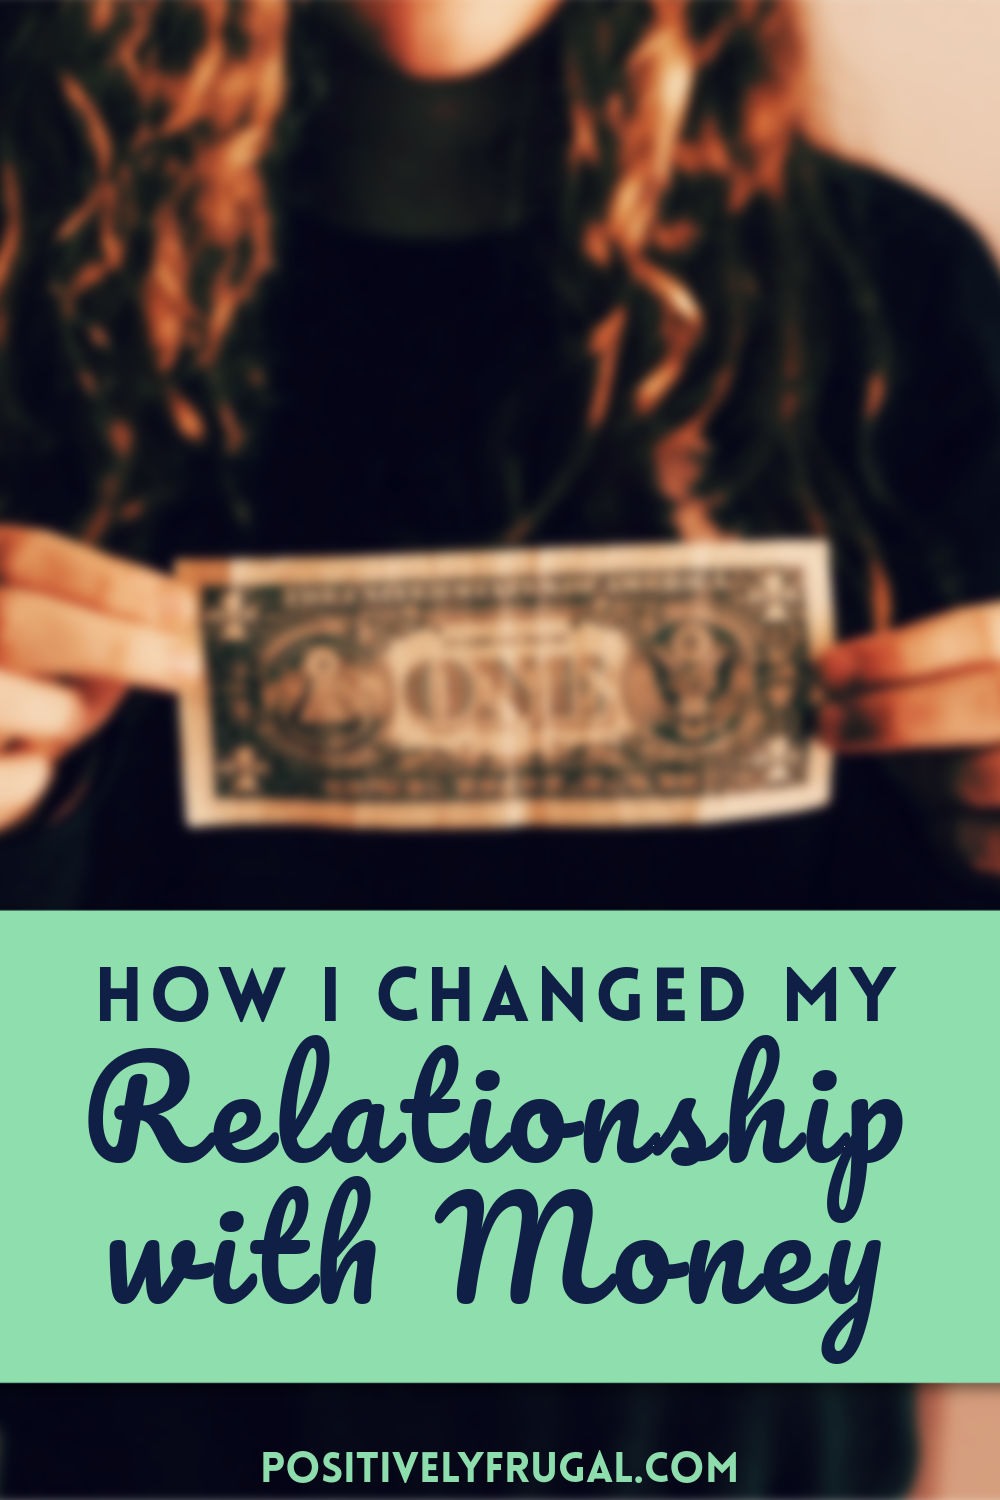 My Relationship with Money by PositivelyFrugal.com